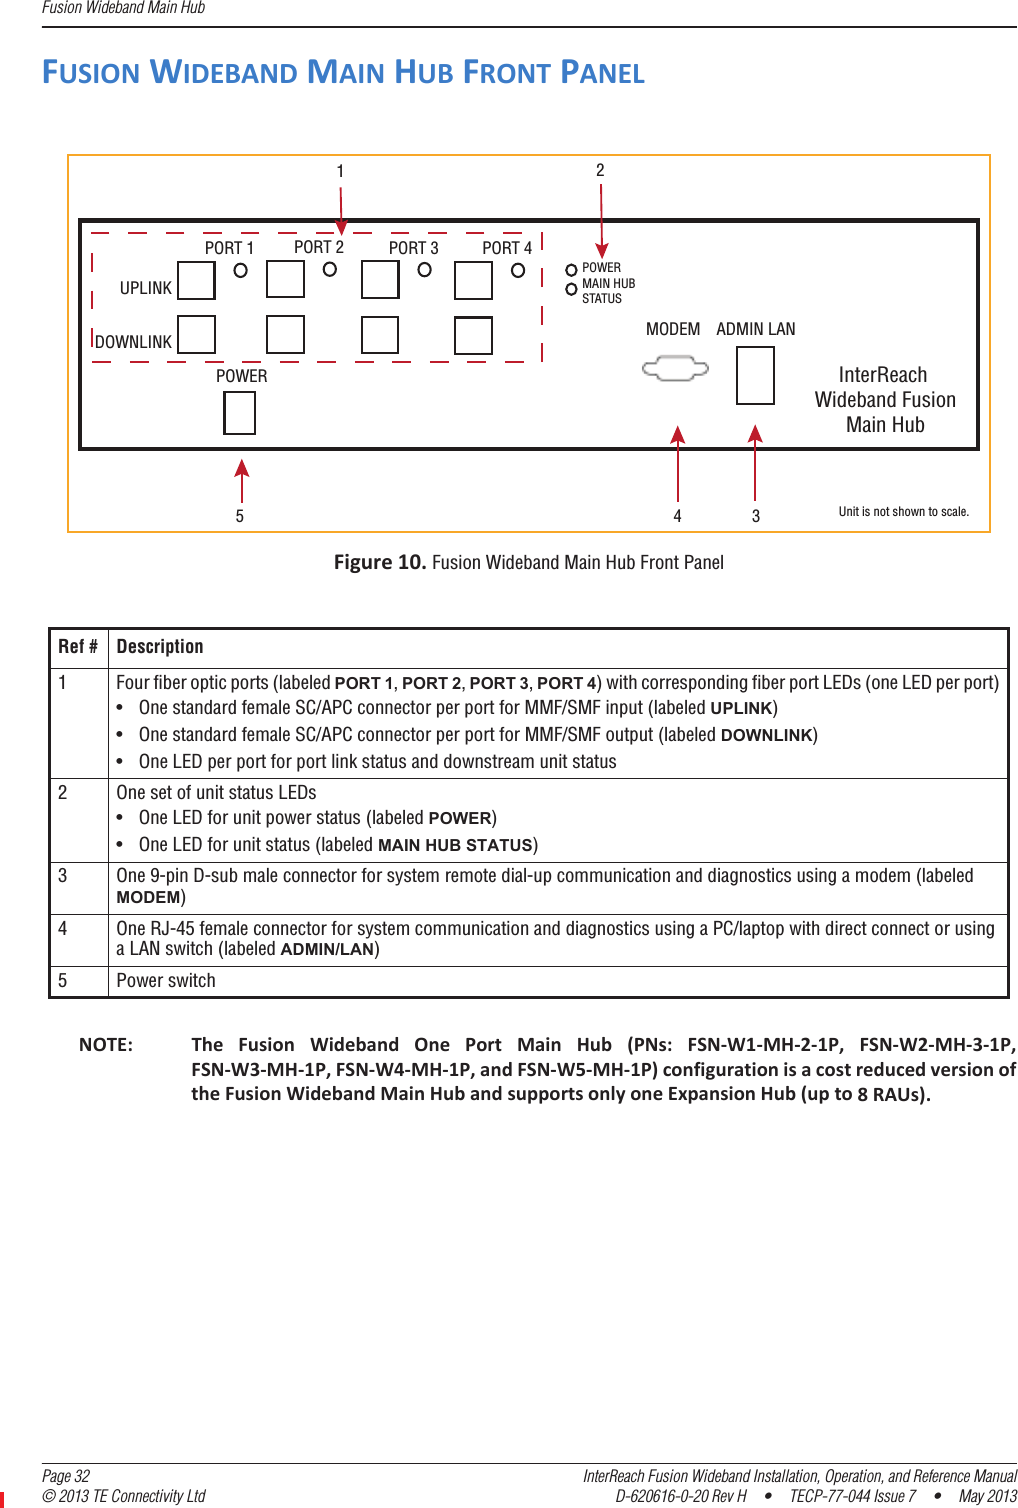 Fusion Wideband Main Hub  Page 32 InterReach Fusion Wideband Installation, Operation, and Reference Manual© 2013 TE Connectivity Ltd D-620616-0-20 Rev H  •  TECP-77-044 Issue 7  •  May 2013FUSIONWIDEBANDMAINHUBFRONTPANELFigure10.Fusion Wideband Main Hub Front PanelNOTE: TheFusionWidebandOnePortMainHub(PNs:FSNͲW1ͲMHͲ2Ͳ1P,FSNͲW2ͲMHͲ3Ͳ1P,FSNͲW3ͲMHͲ1P,FSNͲW4ͲMHͲ1P,andFSNͲW5ͲMHͲ1P)configurationisacostreducedversionoftheFusionWidebandMainHubandsupportsonlyoneExpansionHub(upto8RAUs).Ref # Description1 Four fiber optic ports (labeled PORT 1, PORT 2, PORT 3, PORT 4) with corresponding fiber port LEDs (one LED per port)• One standard female SC/APC connector per port for MMF/SMF input (labeled UPLINK)• One standard female SC/APC connector per port for MMF/SMF output (labeled DOWNLINK)• One LED per port for port link status and downstream unit status 2 One set of unit status LEDs• One LED for unit power status (labeled POWER)• One LED for unit status (labeled MAIN HUB STATUS)3 One 9-pin D-sub male connector for system remote dial-up communication and diagnostics using a modem (labeled MODEM)4 One RJ-45 female connector for system communication and diagnostics using a PC/laptop with direct connect or using a LAN switch (labeled ADMIN/LAN)5 Power switchPOWERMAIN HUBSTATUSUPLINKDOWNLINKPORT 1 PORT 2 PORT 3 PORT 4POWER InterReach Wideband FusionMain HubADMIN LANMODEM12345 Unit is not shown to scale.